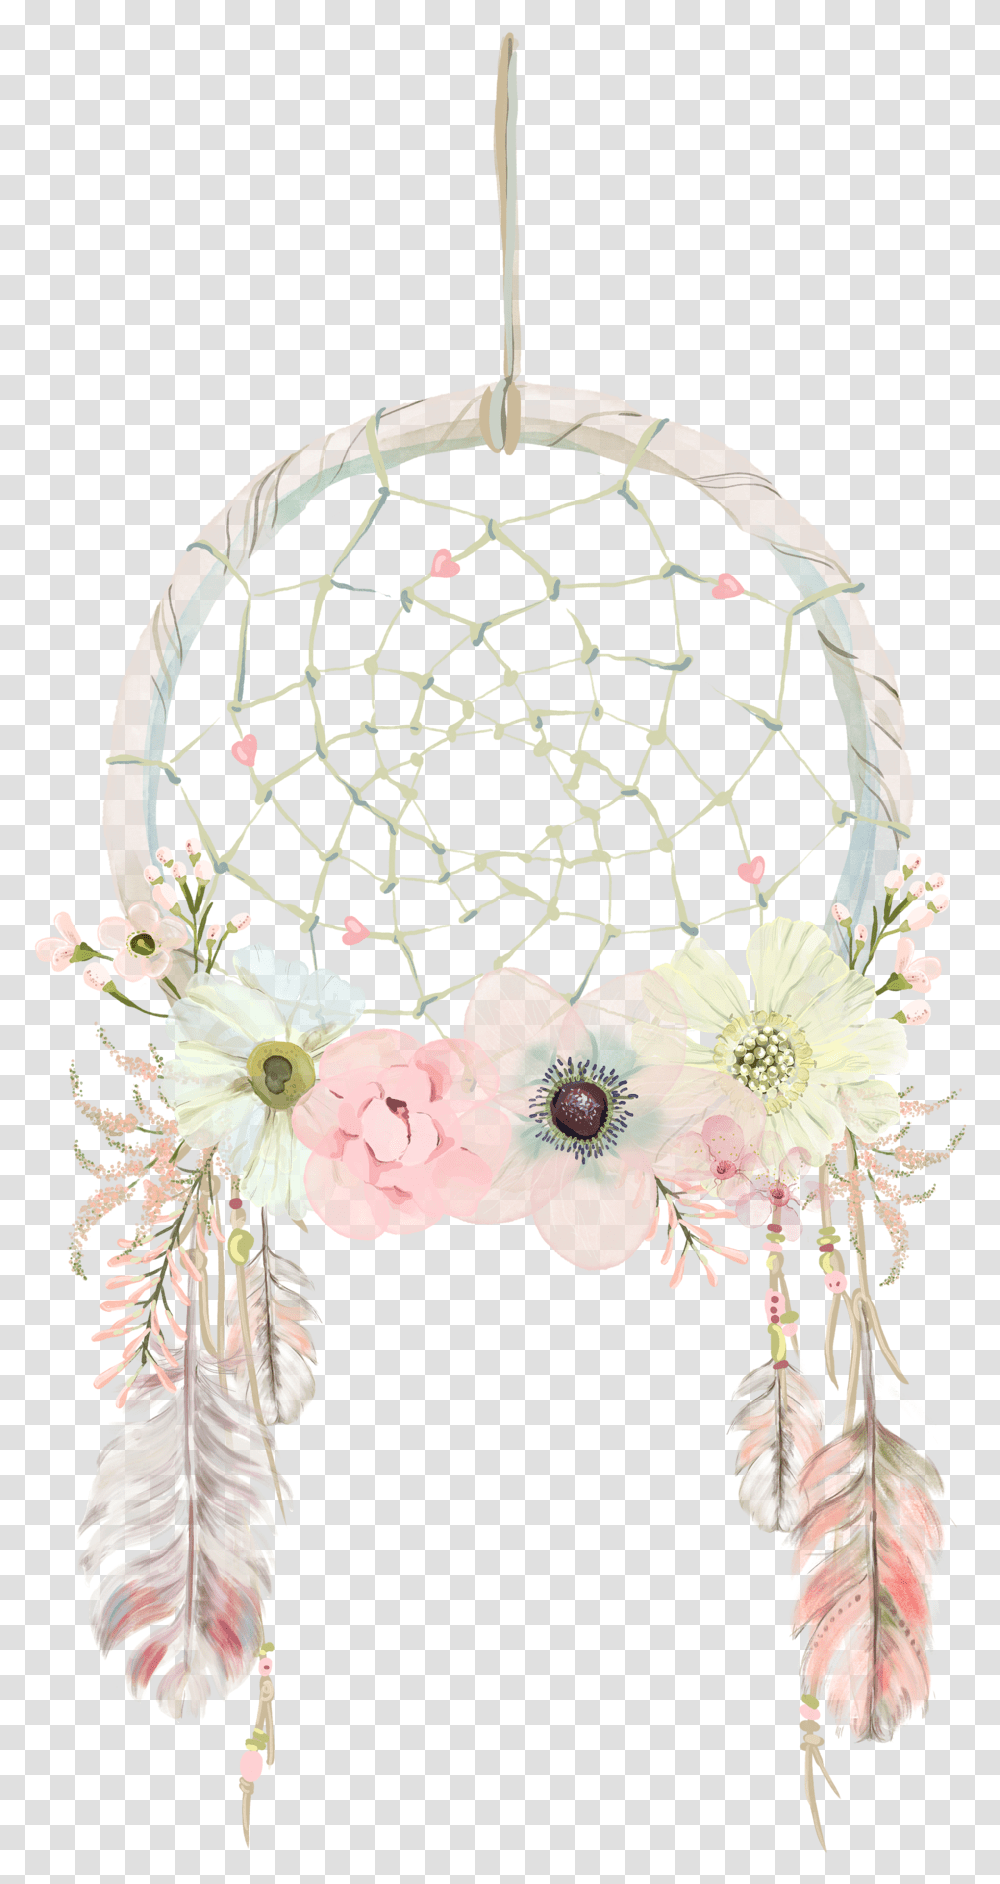 Saferbrowser Yahoo Image Search Boho Dream Catcher Clipart, Pattern, Floral Design, Accessories Transparent Png